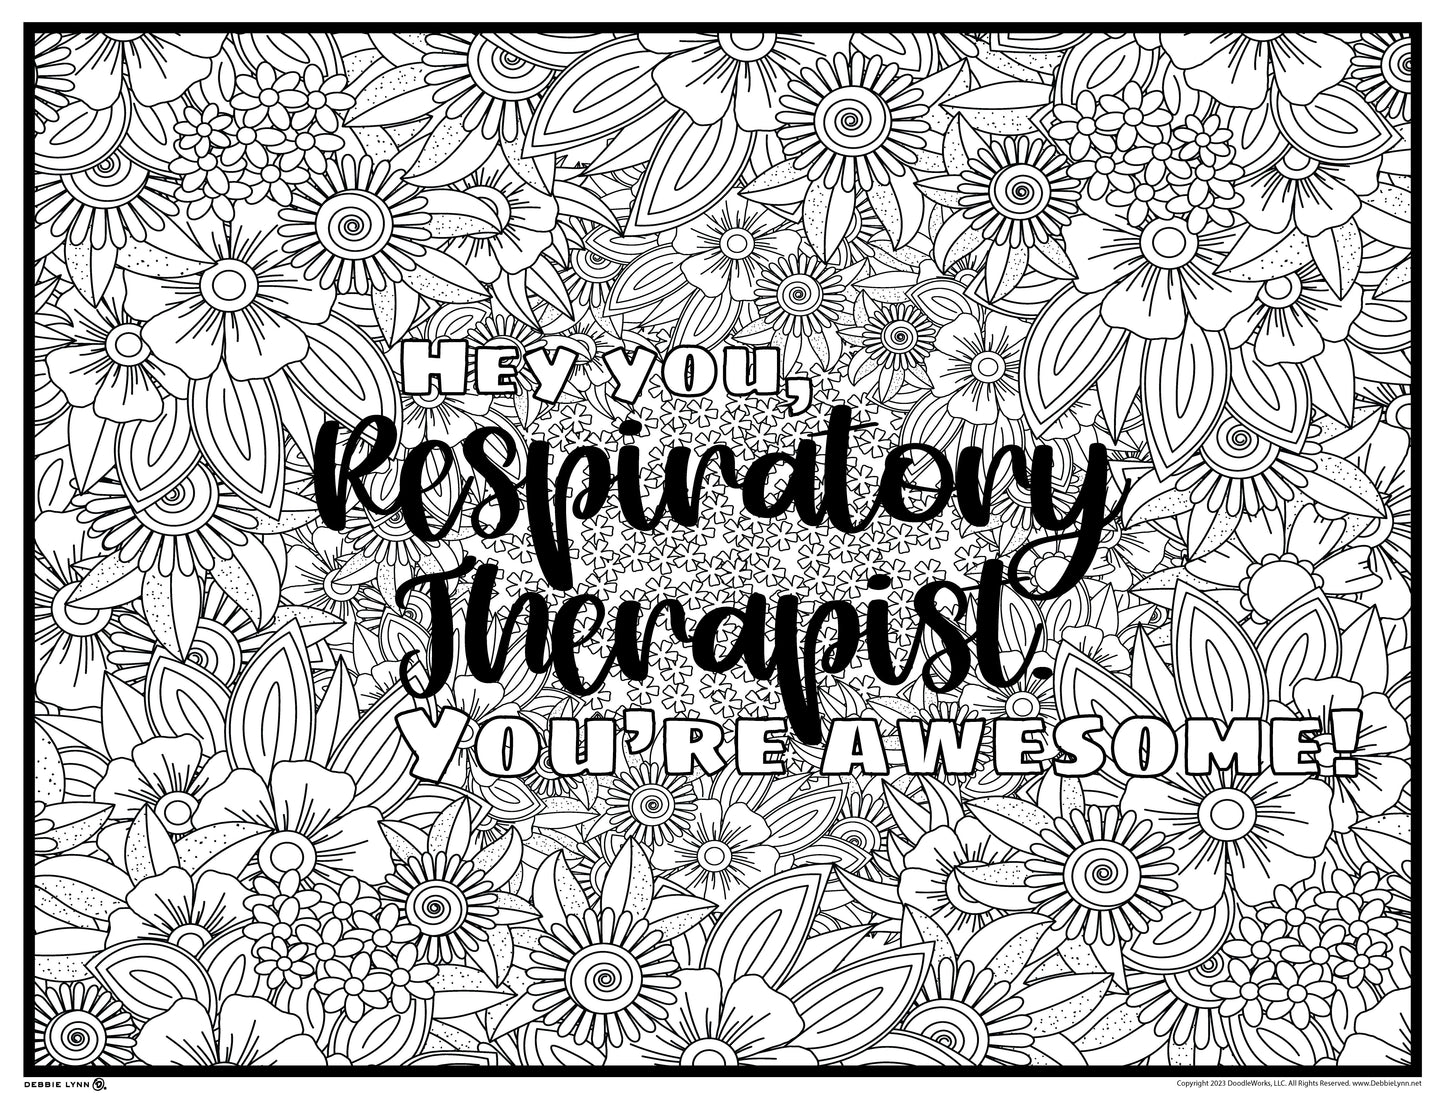 Respiratory Therapist Personalized Giant Coloring Poster 46"X60"